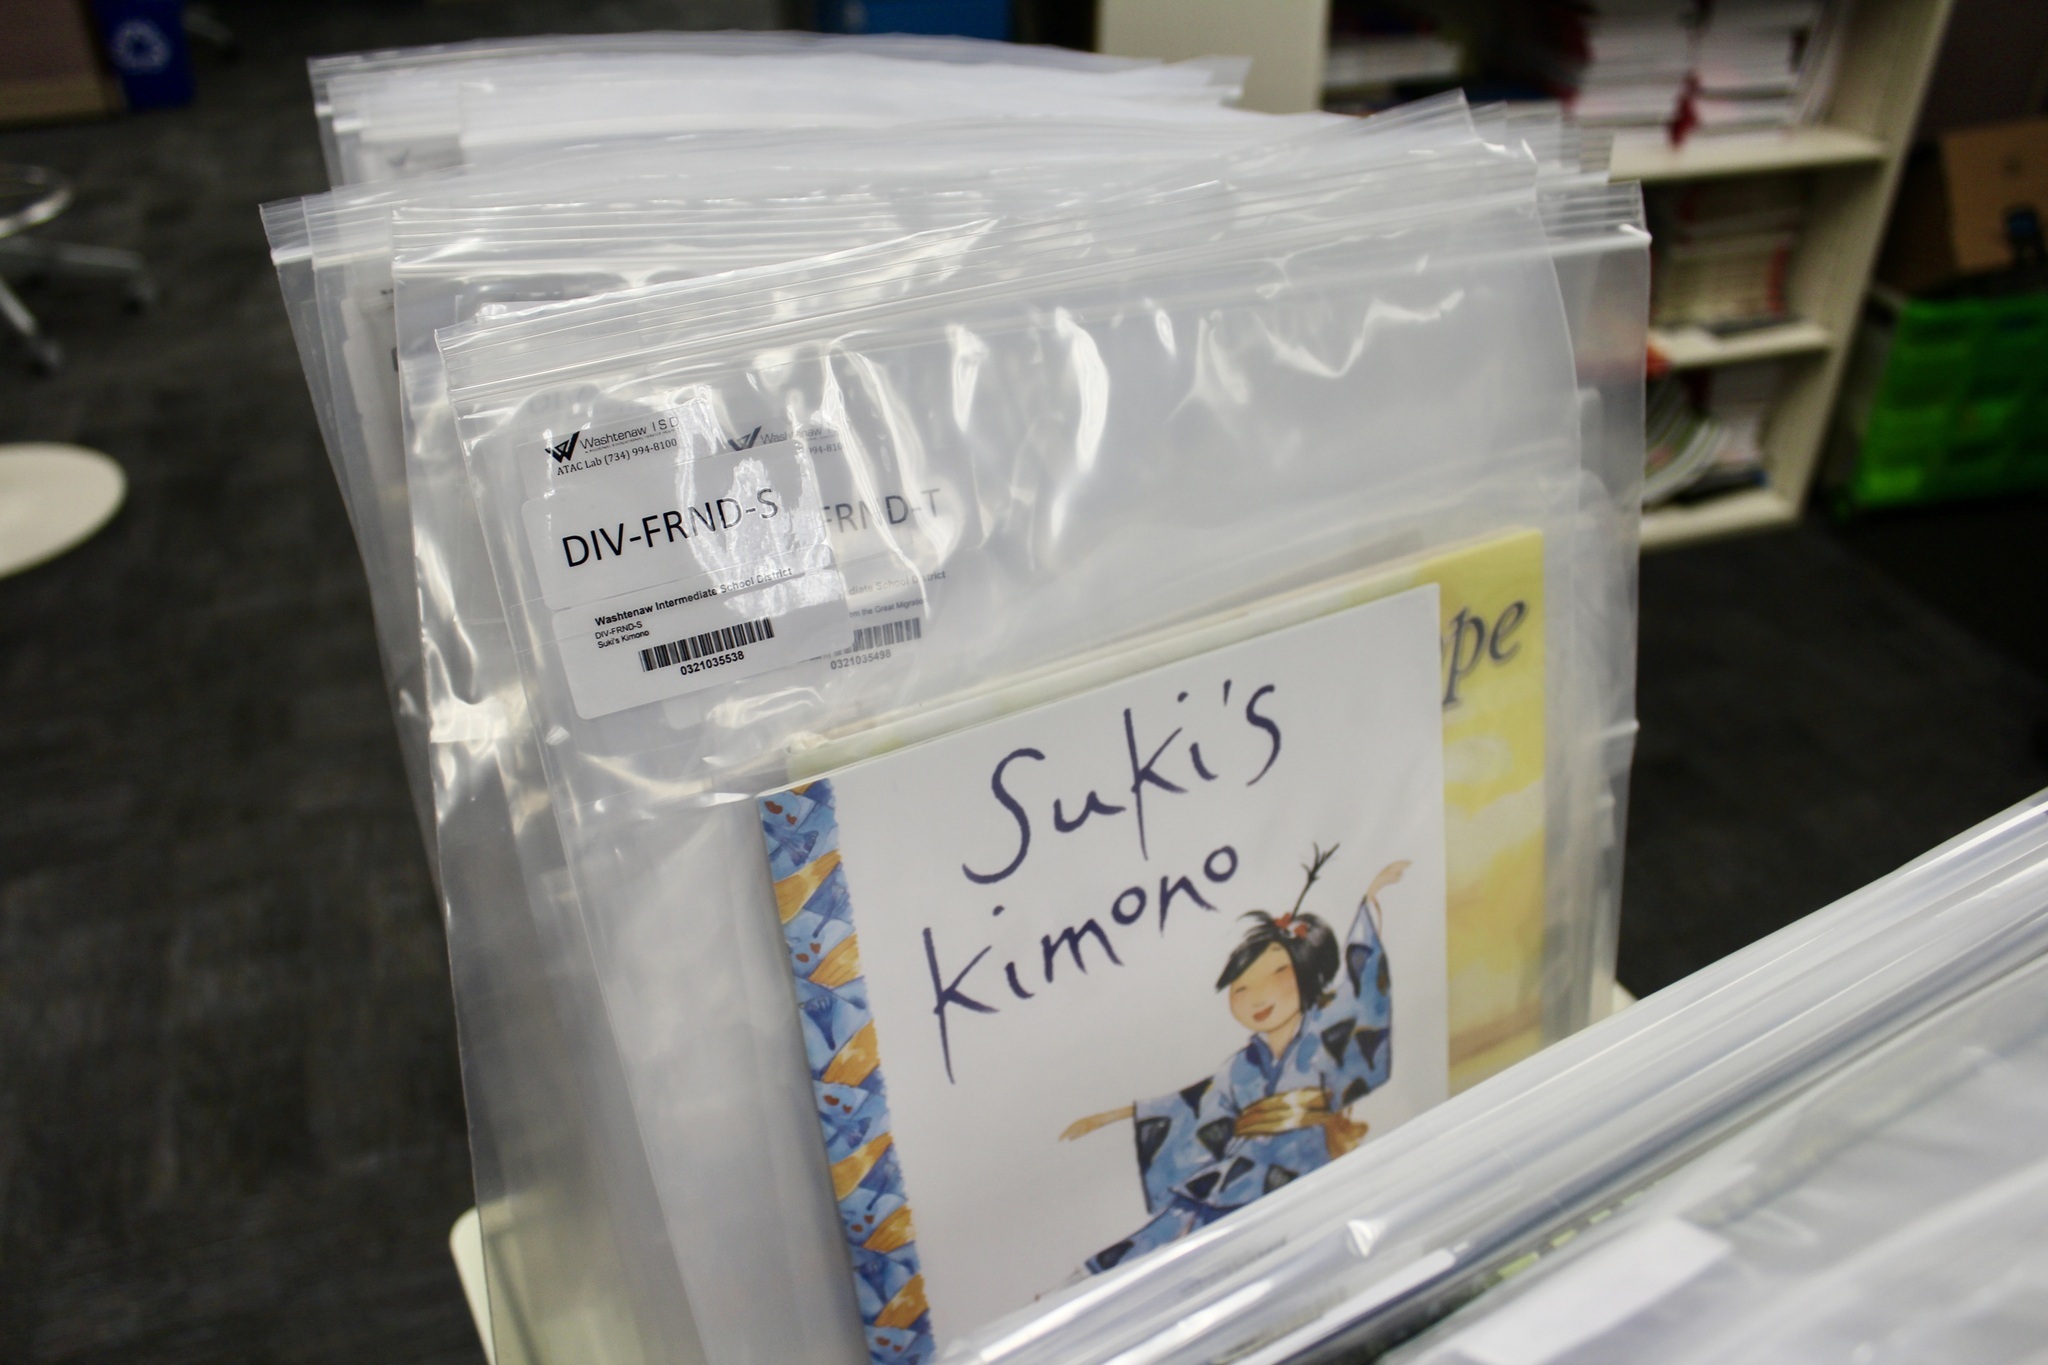 The book suki's kimono sits in a catalog bag with other books on cart